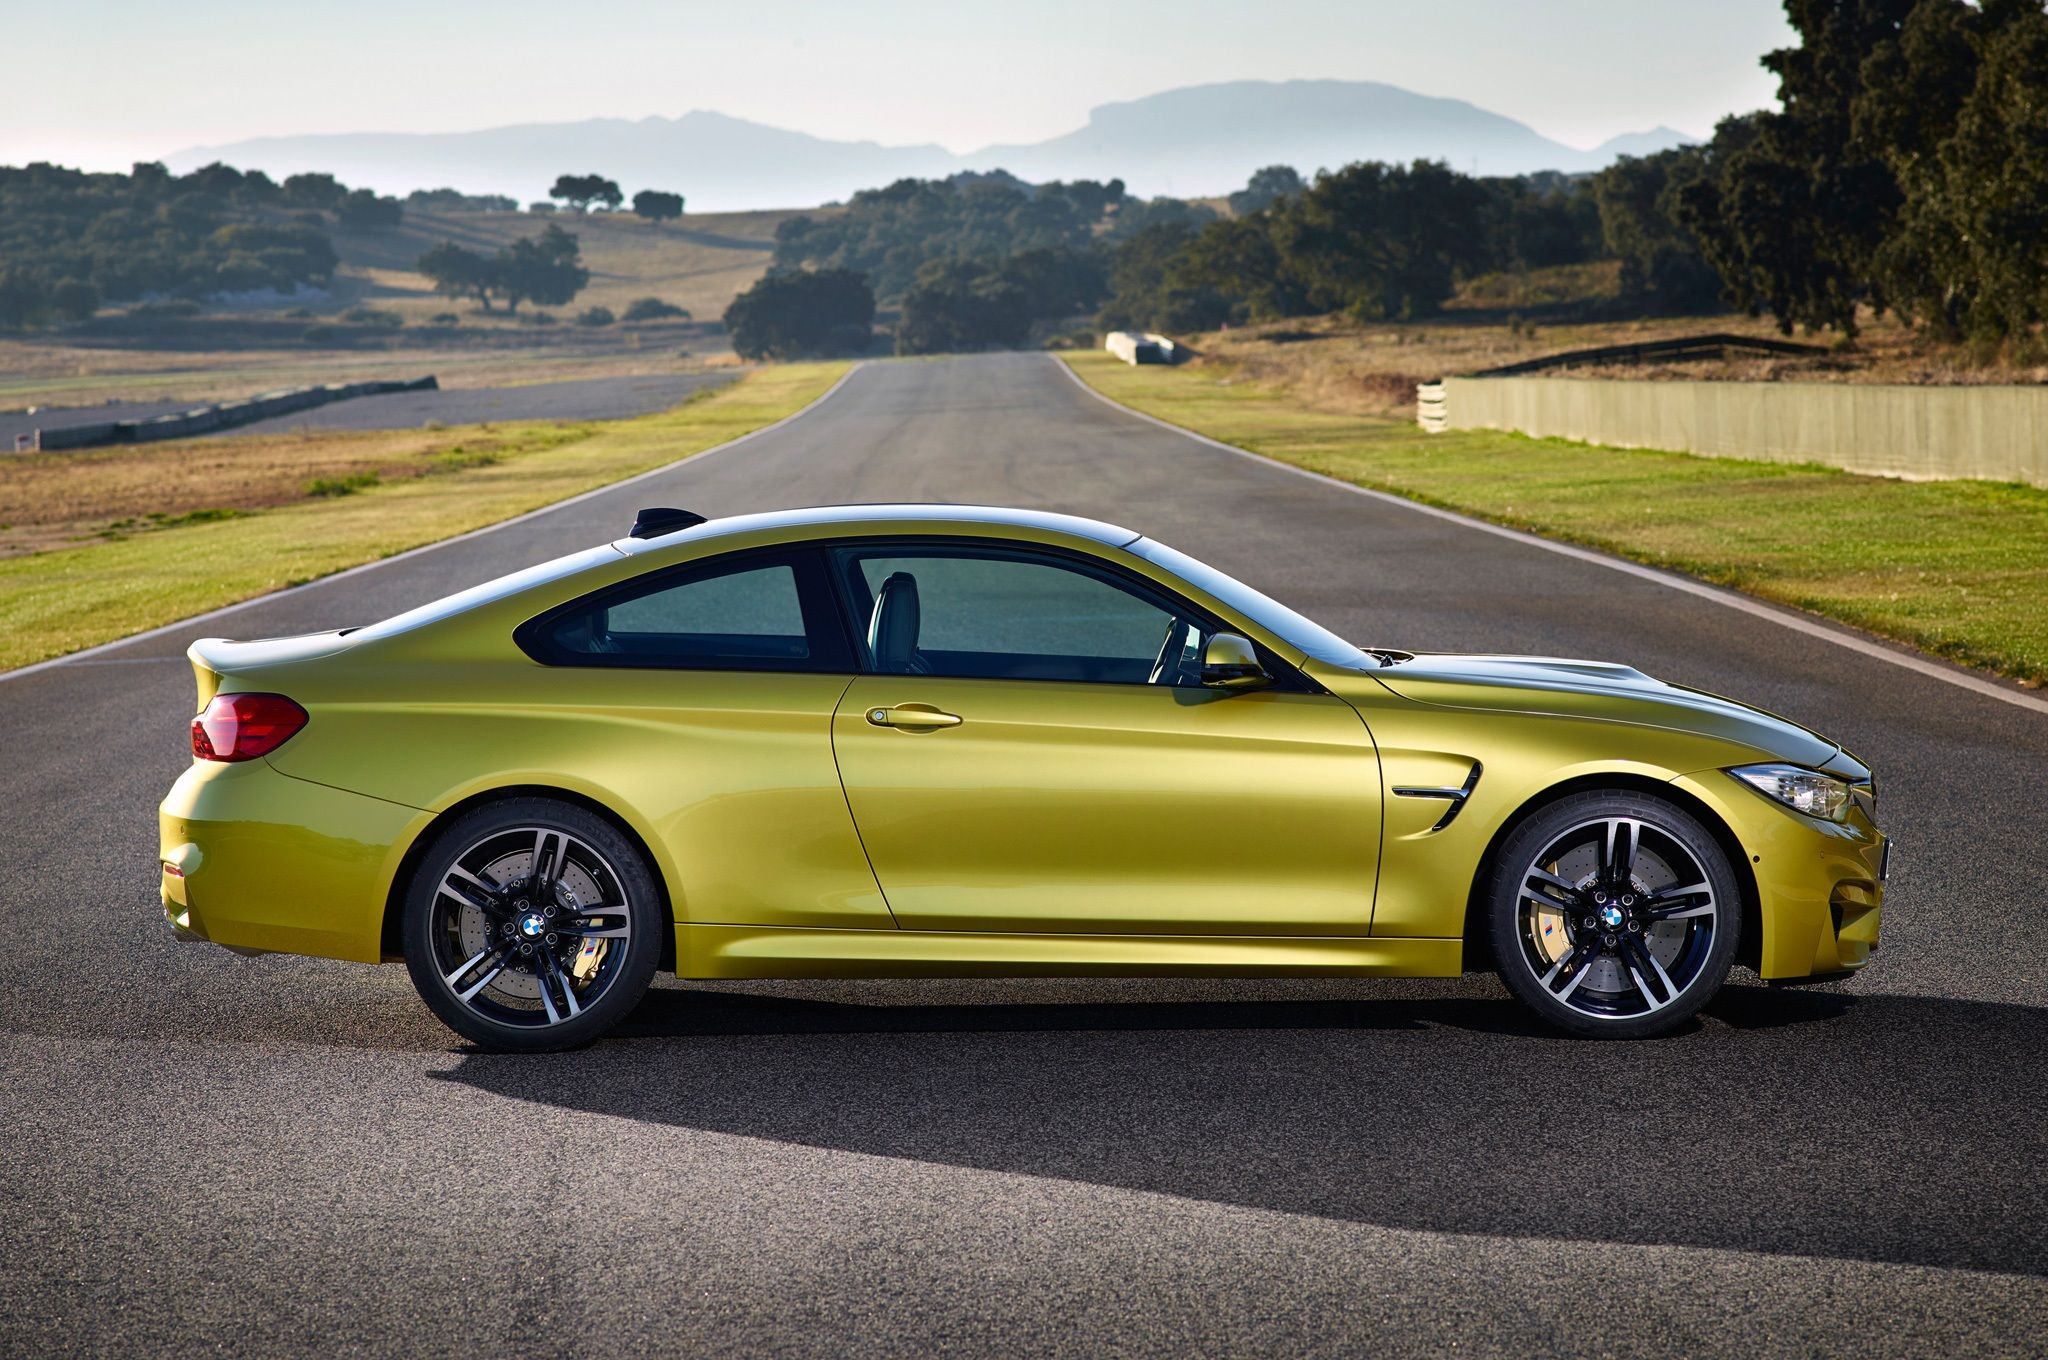 2015 Bmw M4 Yellow Side Design (View 41 of 41)